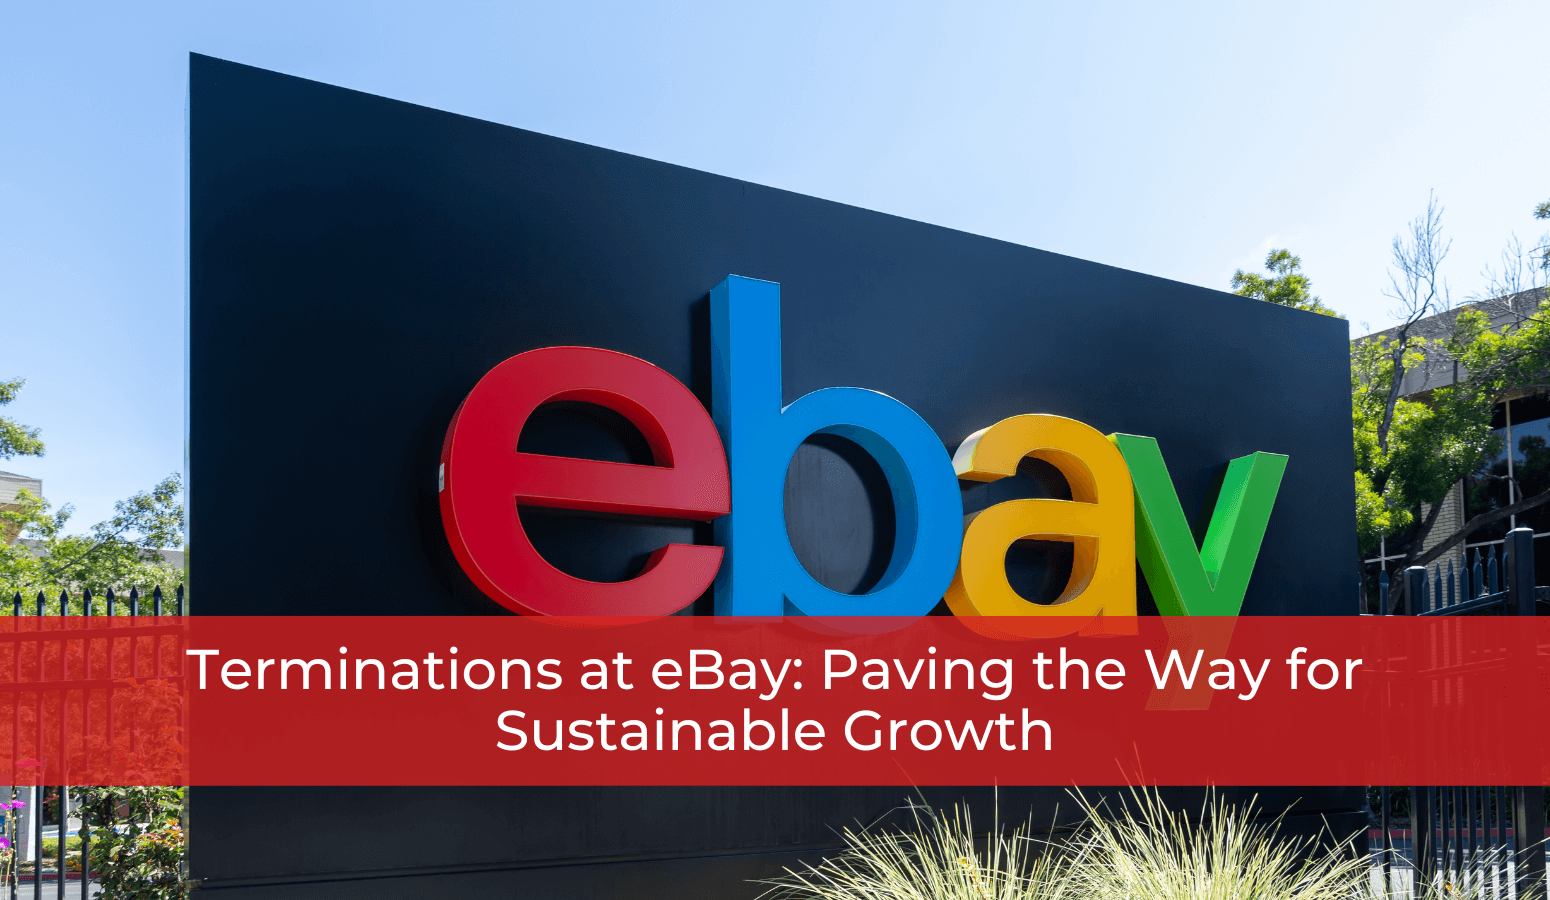 Featured image for “Terminations at eBay: Paving the Way for Sustainable Growth”